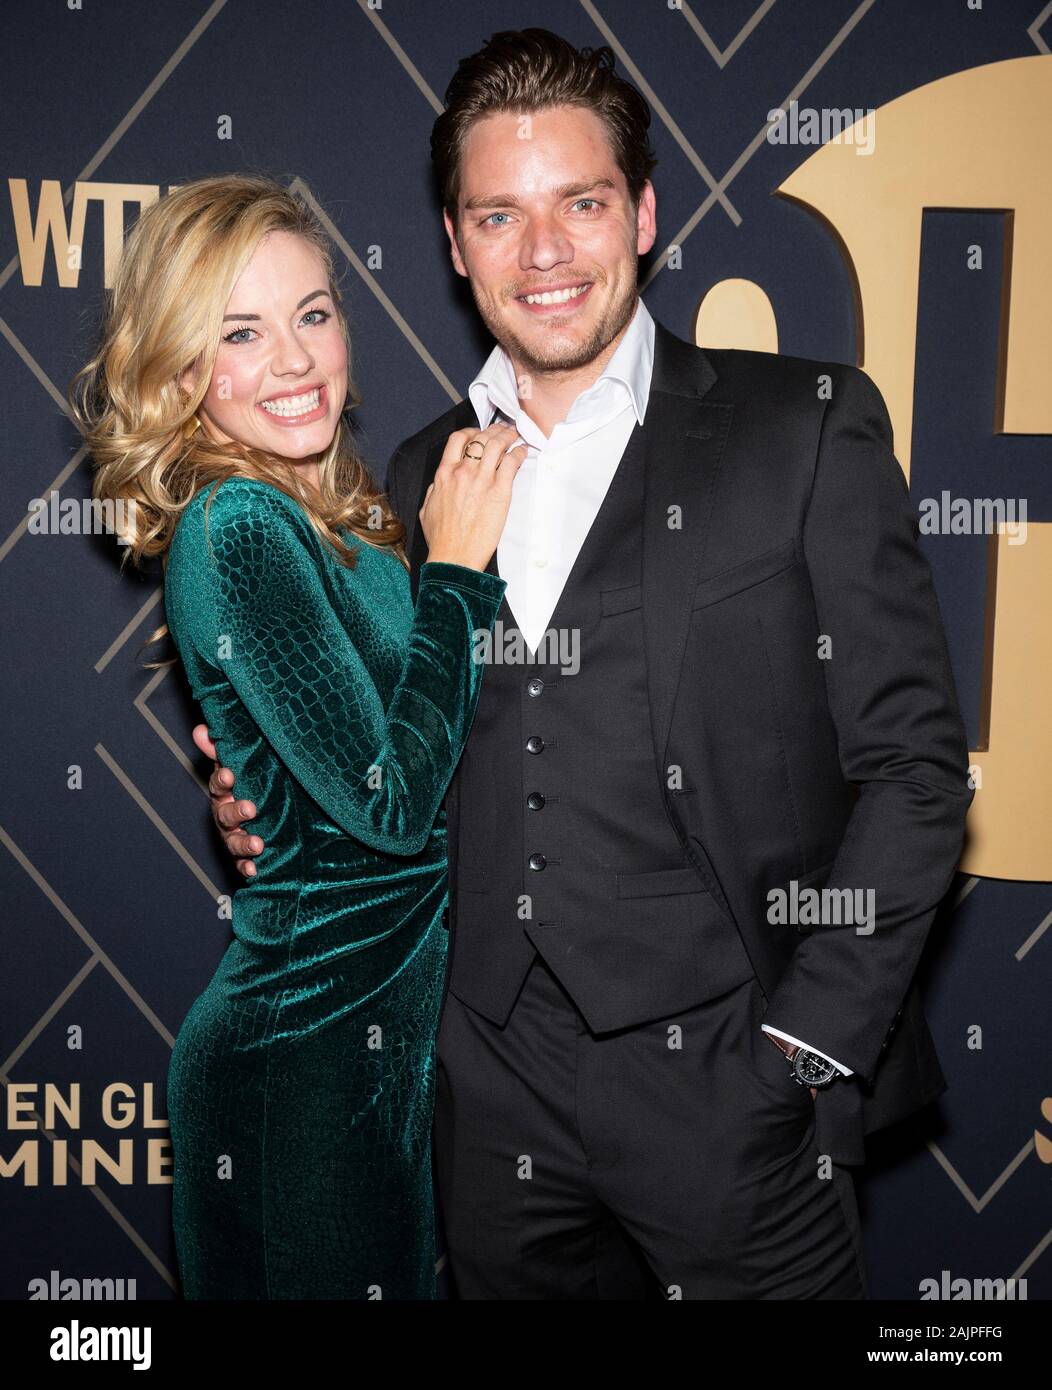 Los Angeles, CA, USA - Jan 04, 2020: Molly Burnett and Dominic Sherwood  attend the Showtime Golden Globe Nominees Celebration at the Sunset Tower  Hote Stock Photo - Alamy